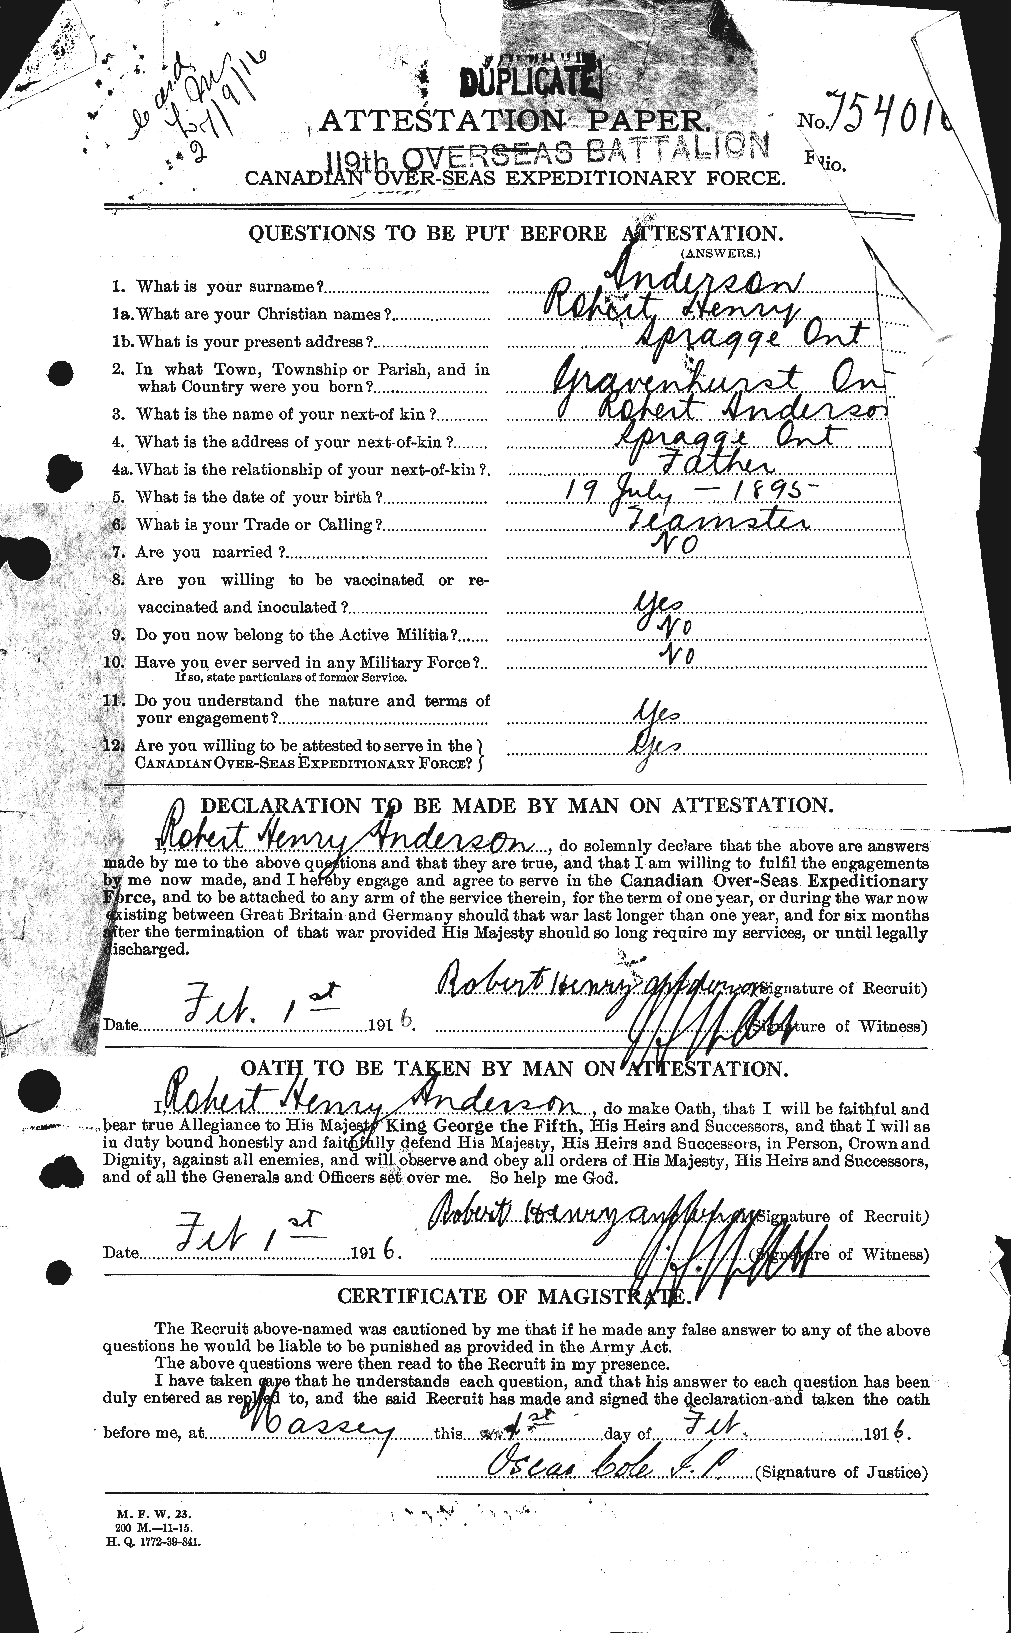 Personnel Records of the First World War - CEF 207249a